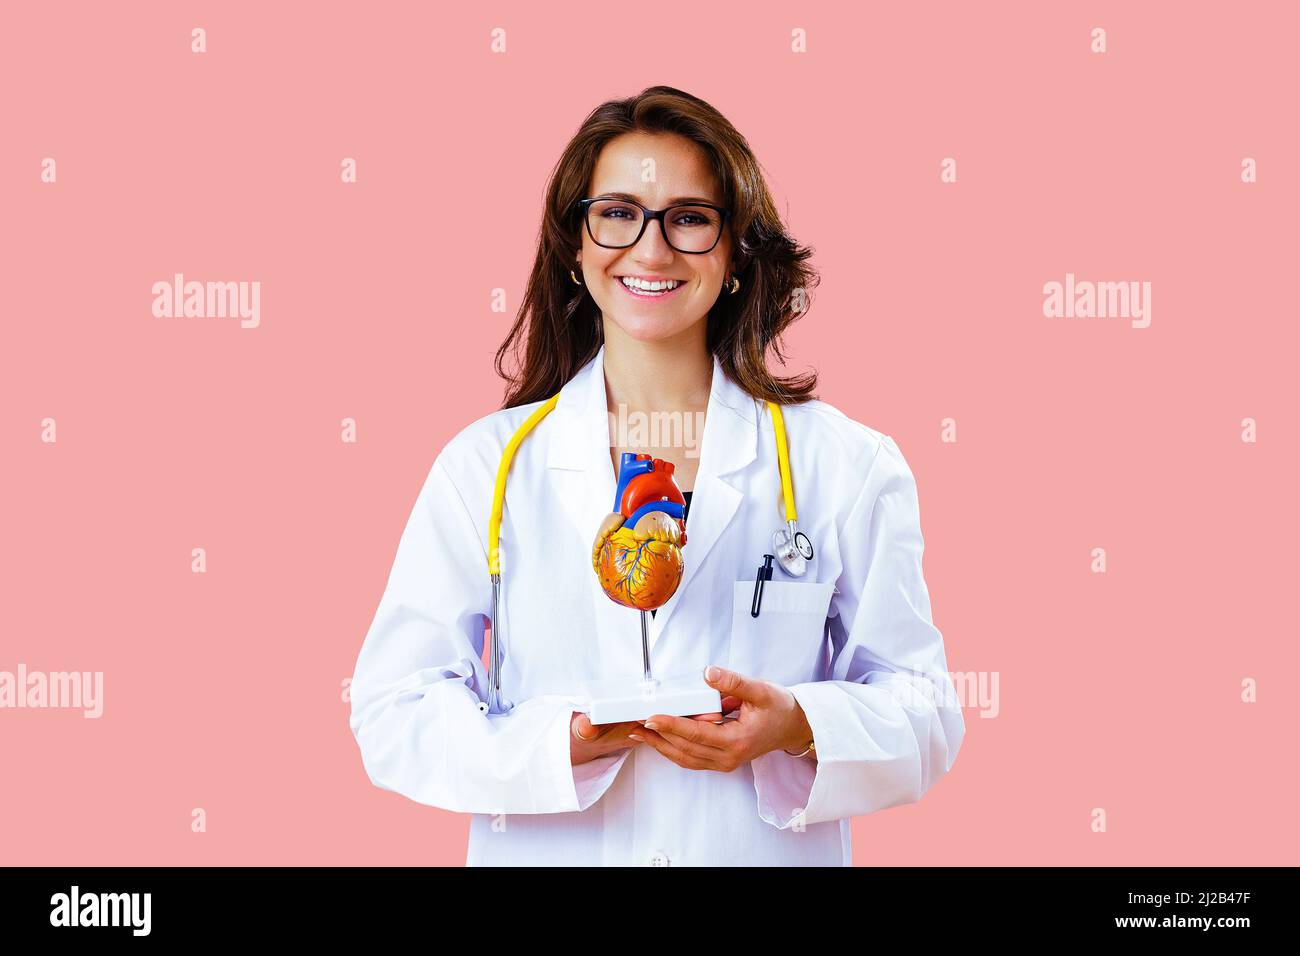 Female doctor cardiologist with stethoscope is holding a model of human heart in hands health care cardiologist Stock Photo